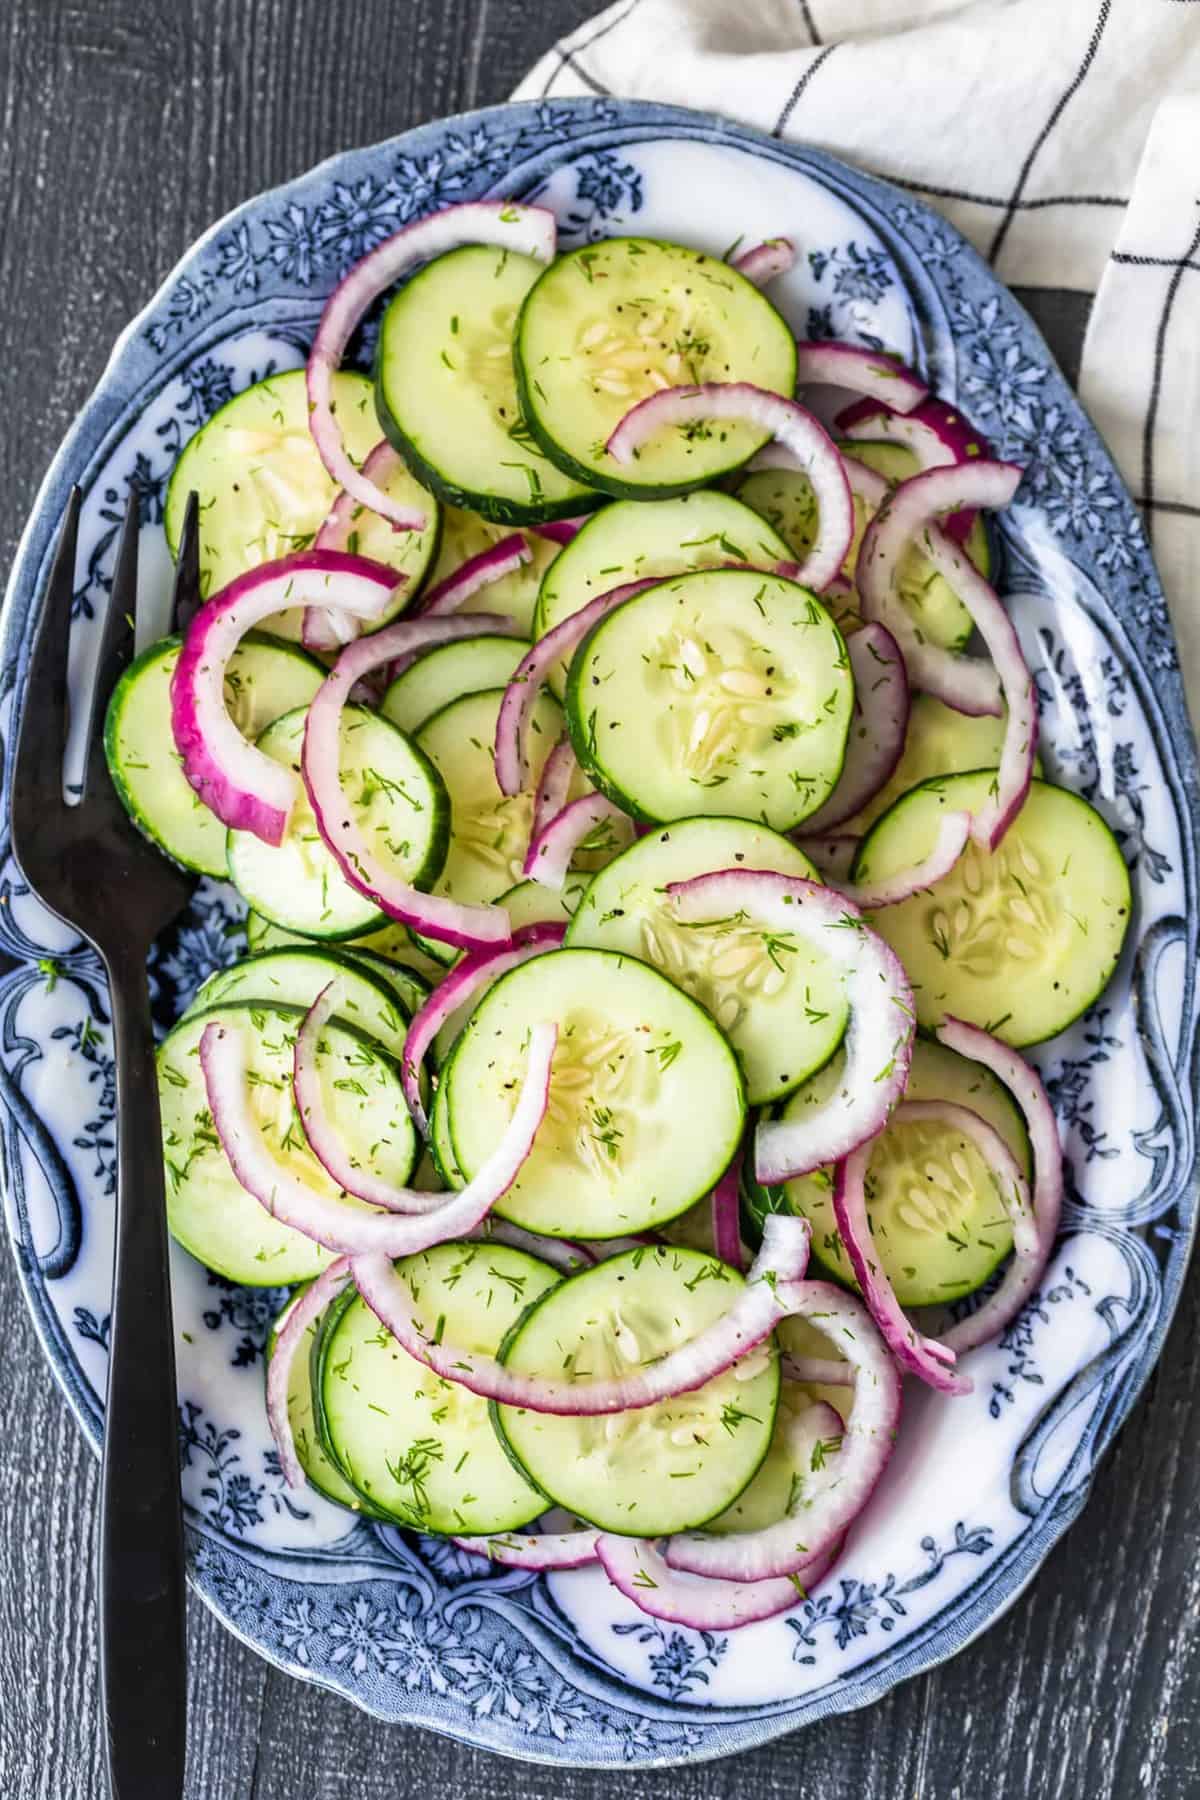 Cucumber and onion salad topped with fresh dill